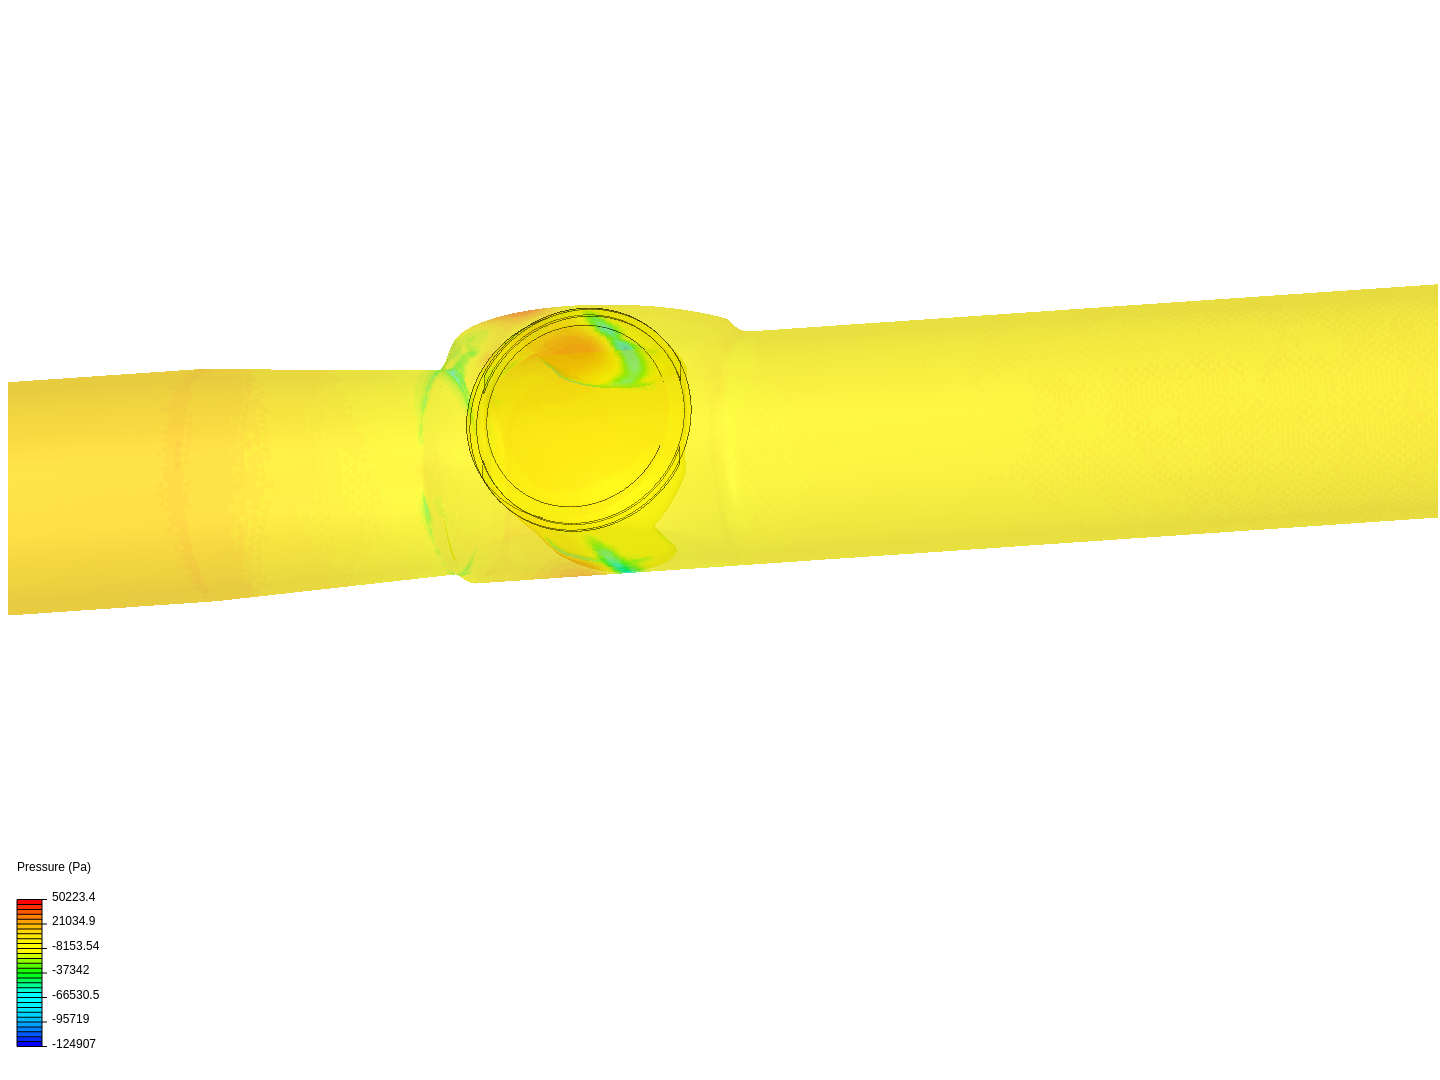 Small Spherical Flow Device image